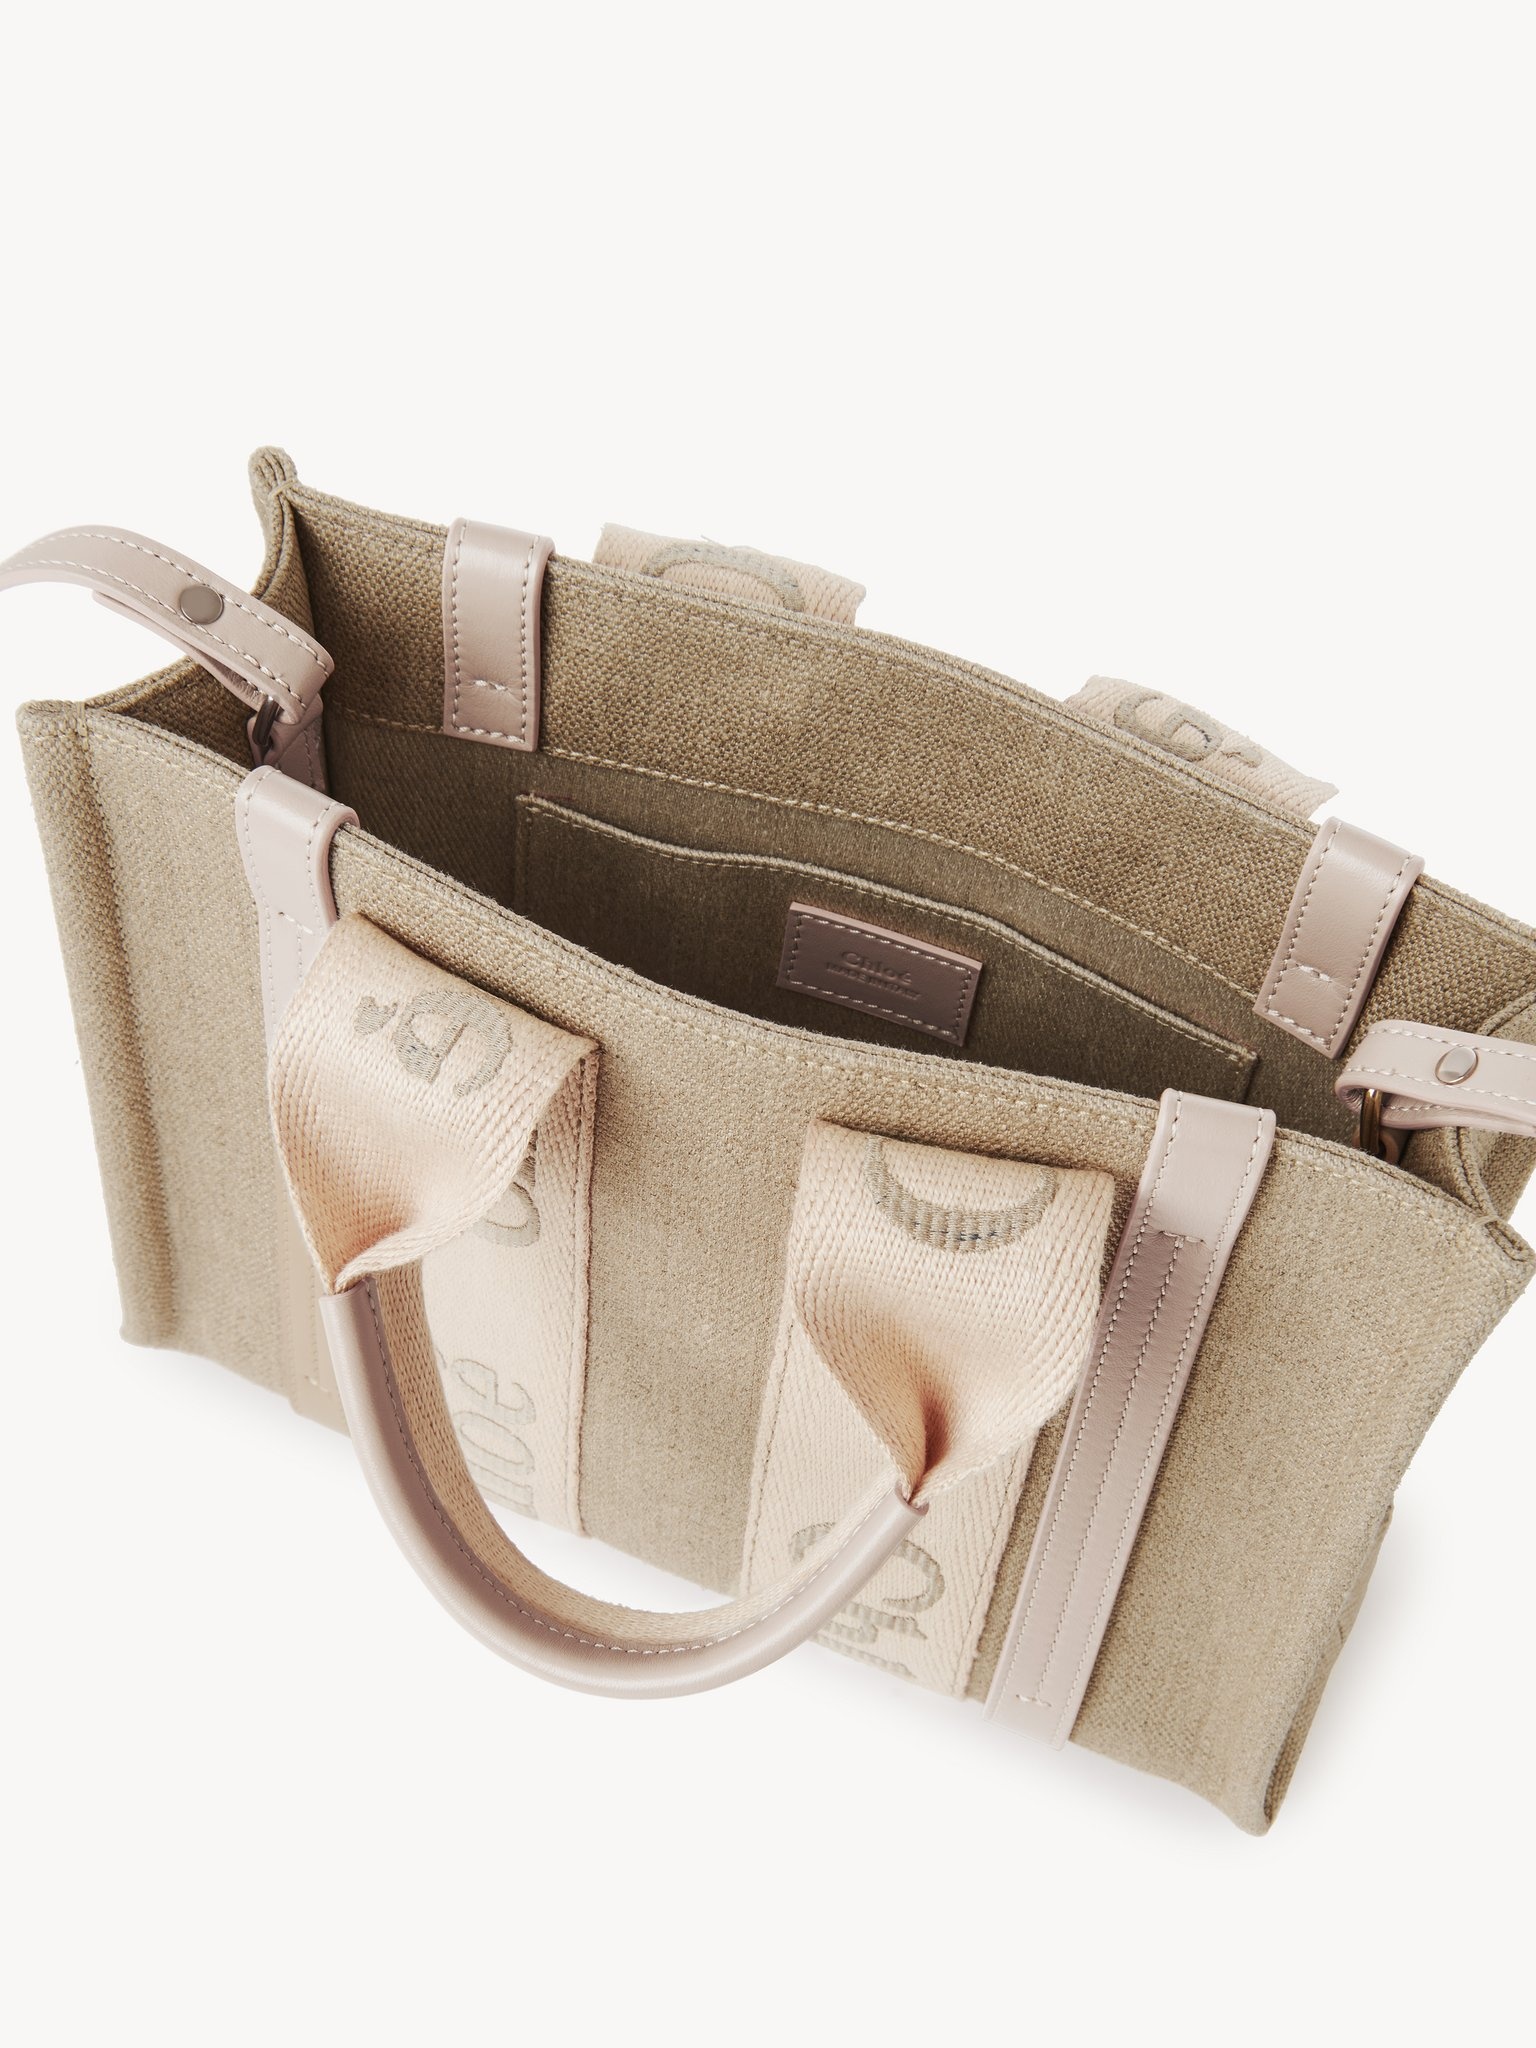 SMALL WOODY TOTE BAG IN LINEN - 5